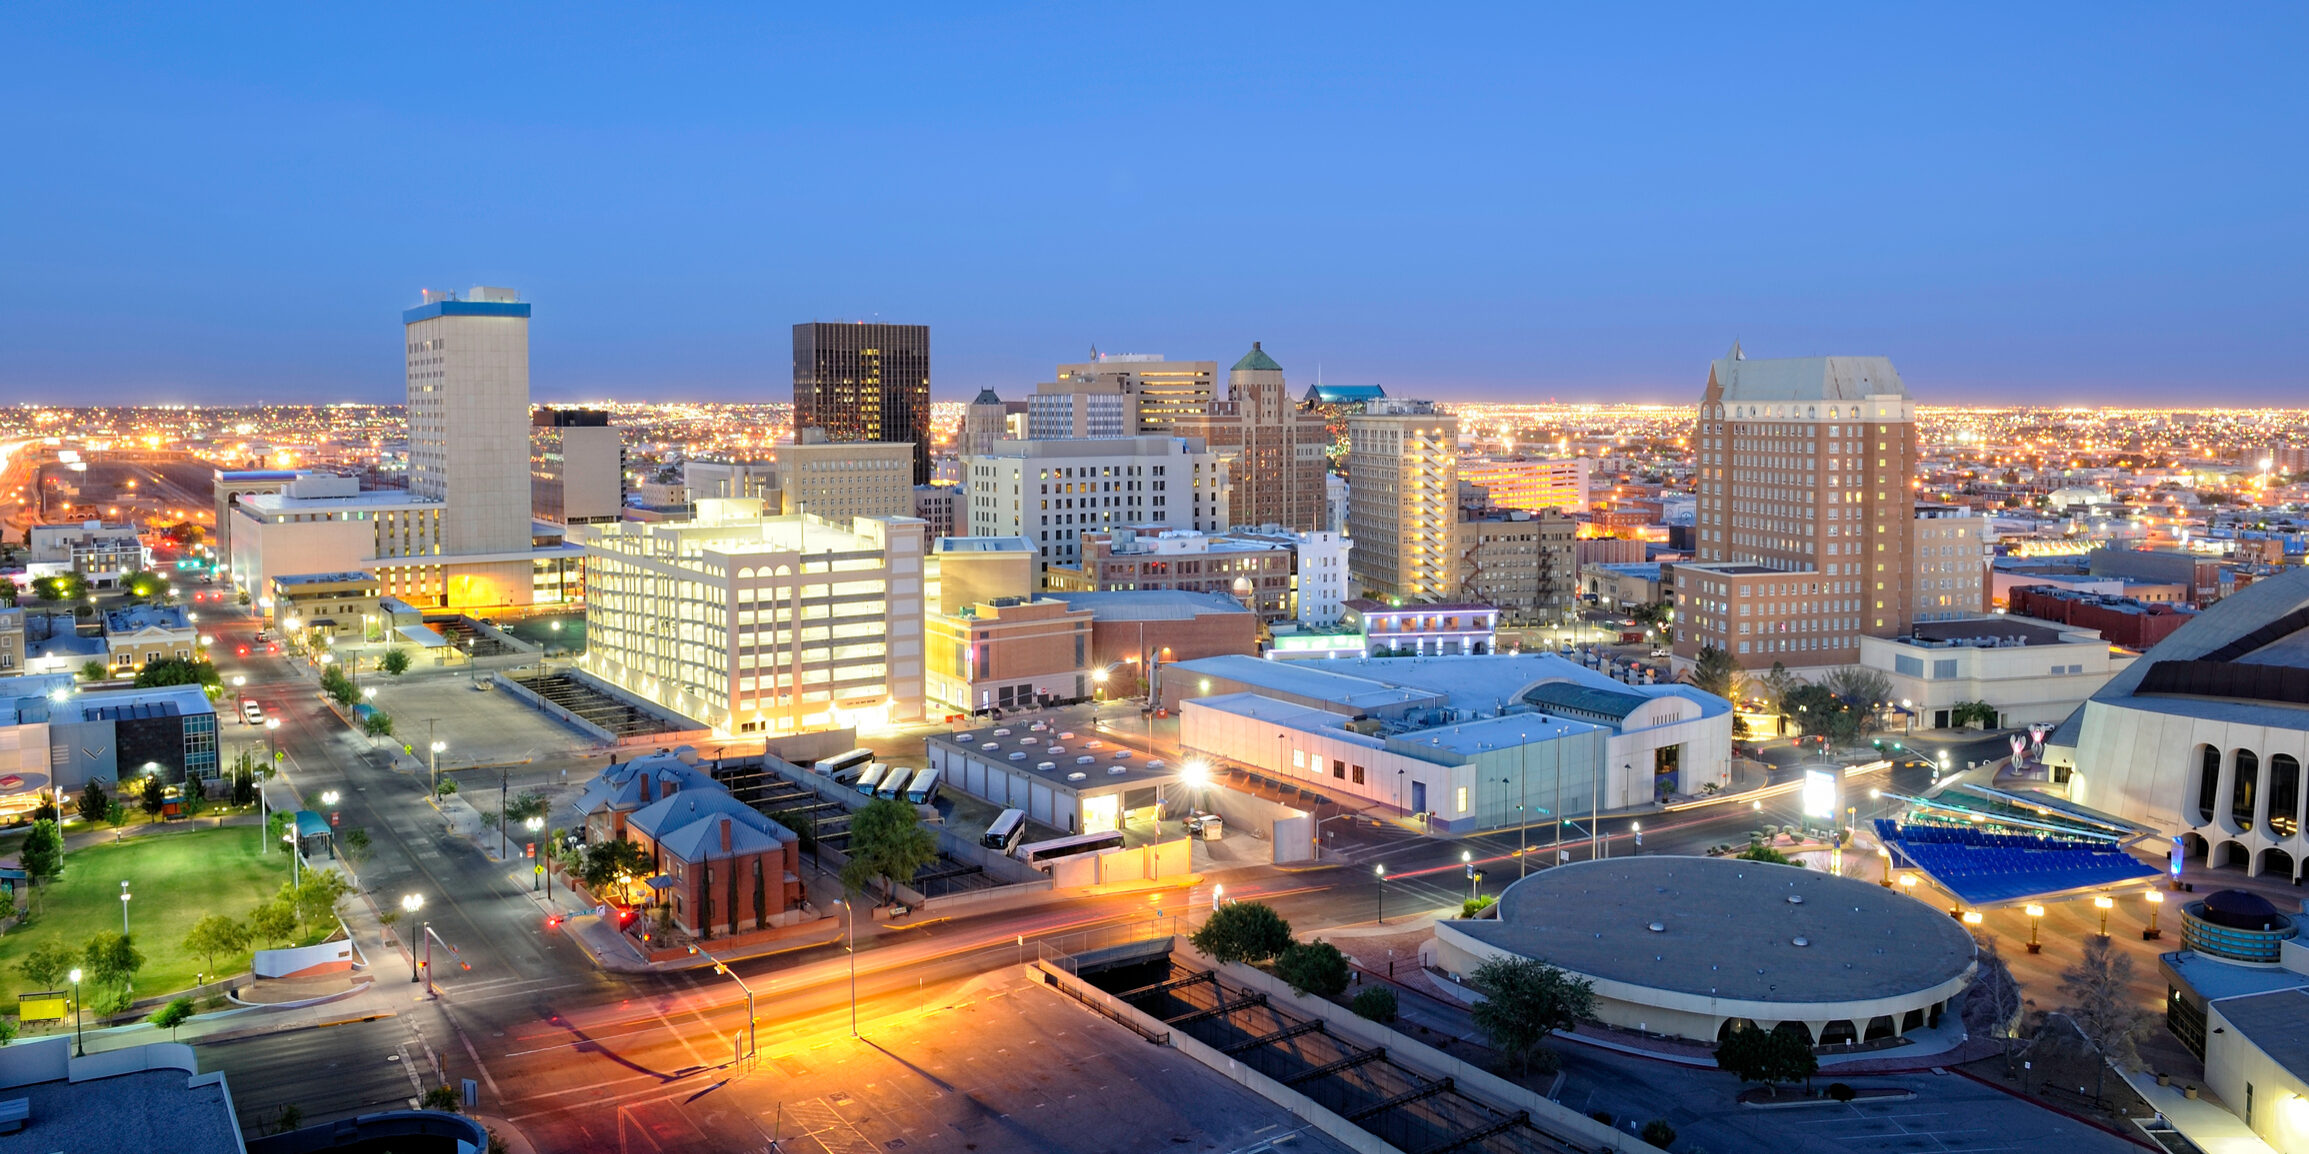 Downtown El Paso Texas skyline seen just after sunset featuring many buildings and street lights